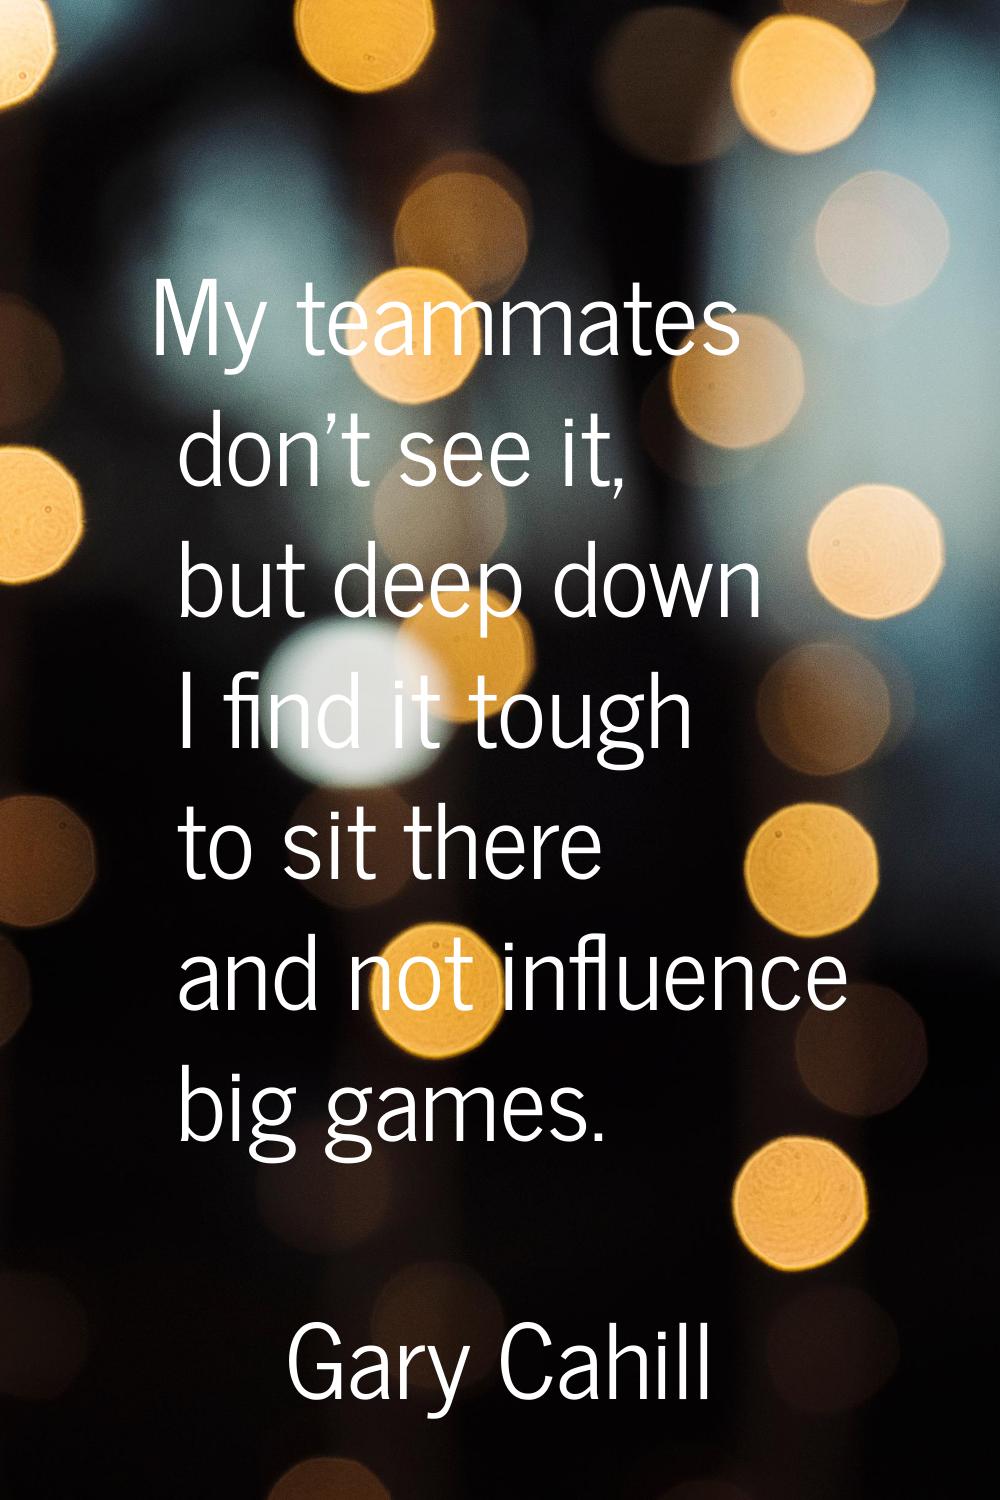 My teammates don't see it, but deep down I find it tough to sit there and not influence big games.